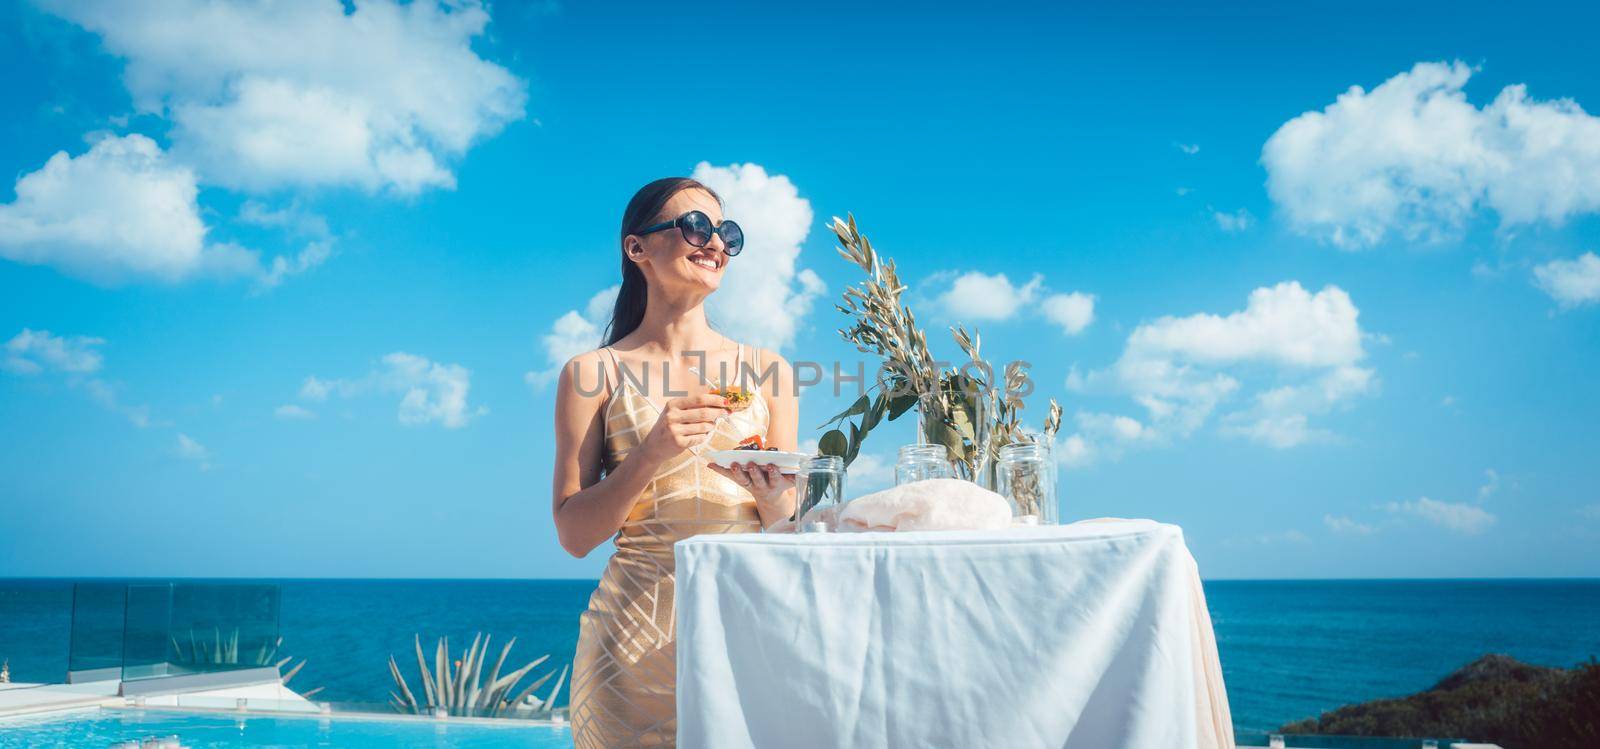 Woman in golden dress having food at beach party with pool and beach in the background